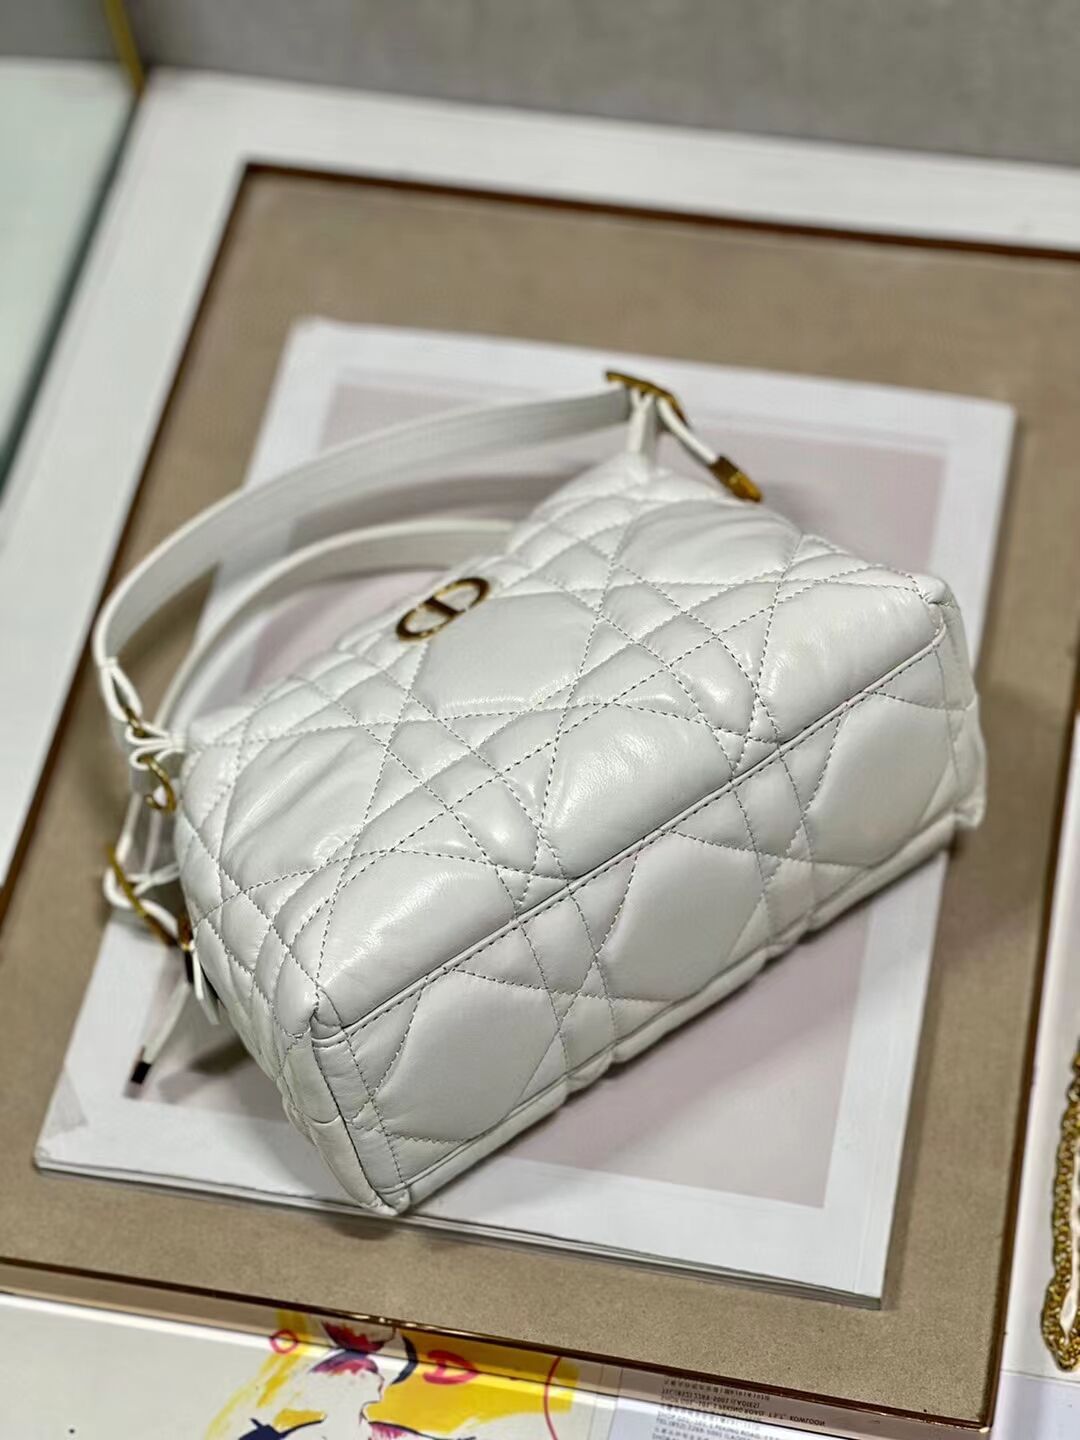 LADY DIOR TOP HANDLE SMALL BAG Latte Cannage Lambskin C0655 WHITE